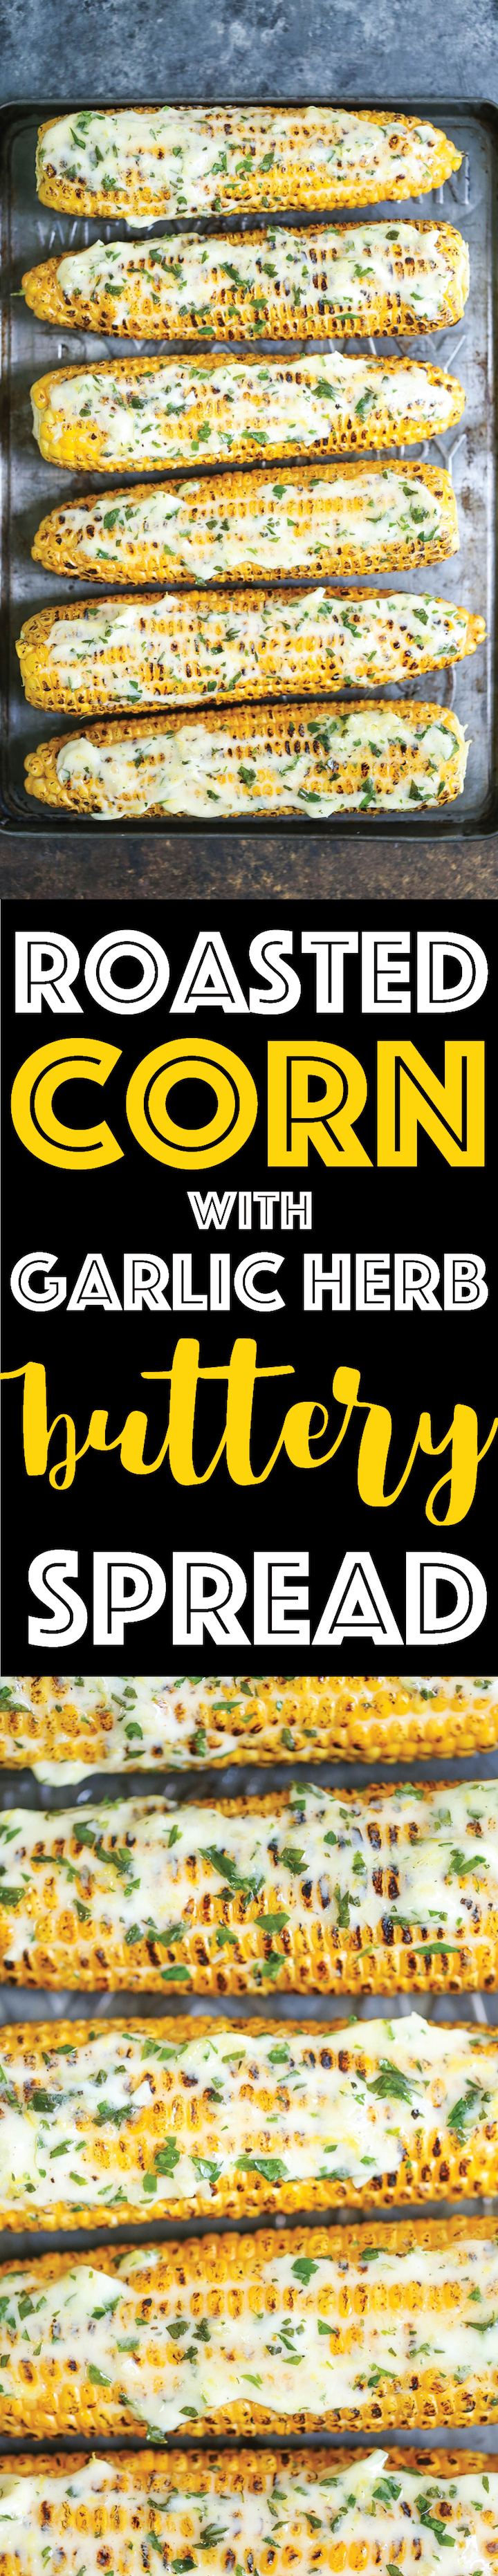 Roasted Corn with Garlic Herb Buttery Spread - This spread is a GAME CHANGER. Spread it on anything and everything! It comes together in less than 5 min!